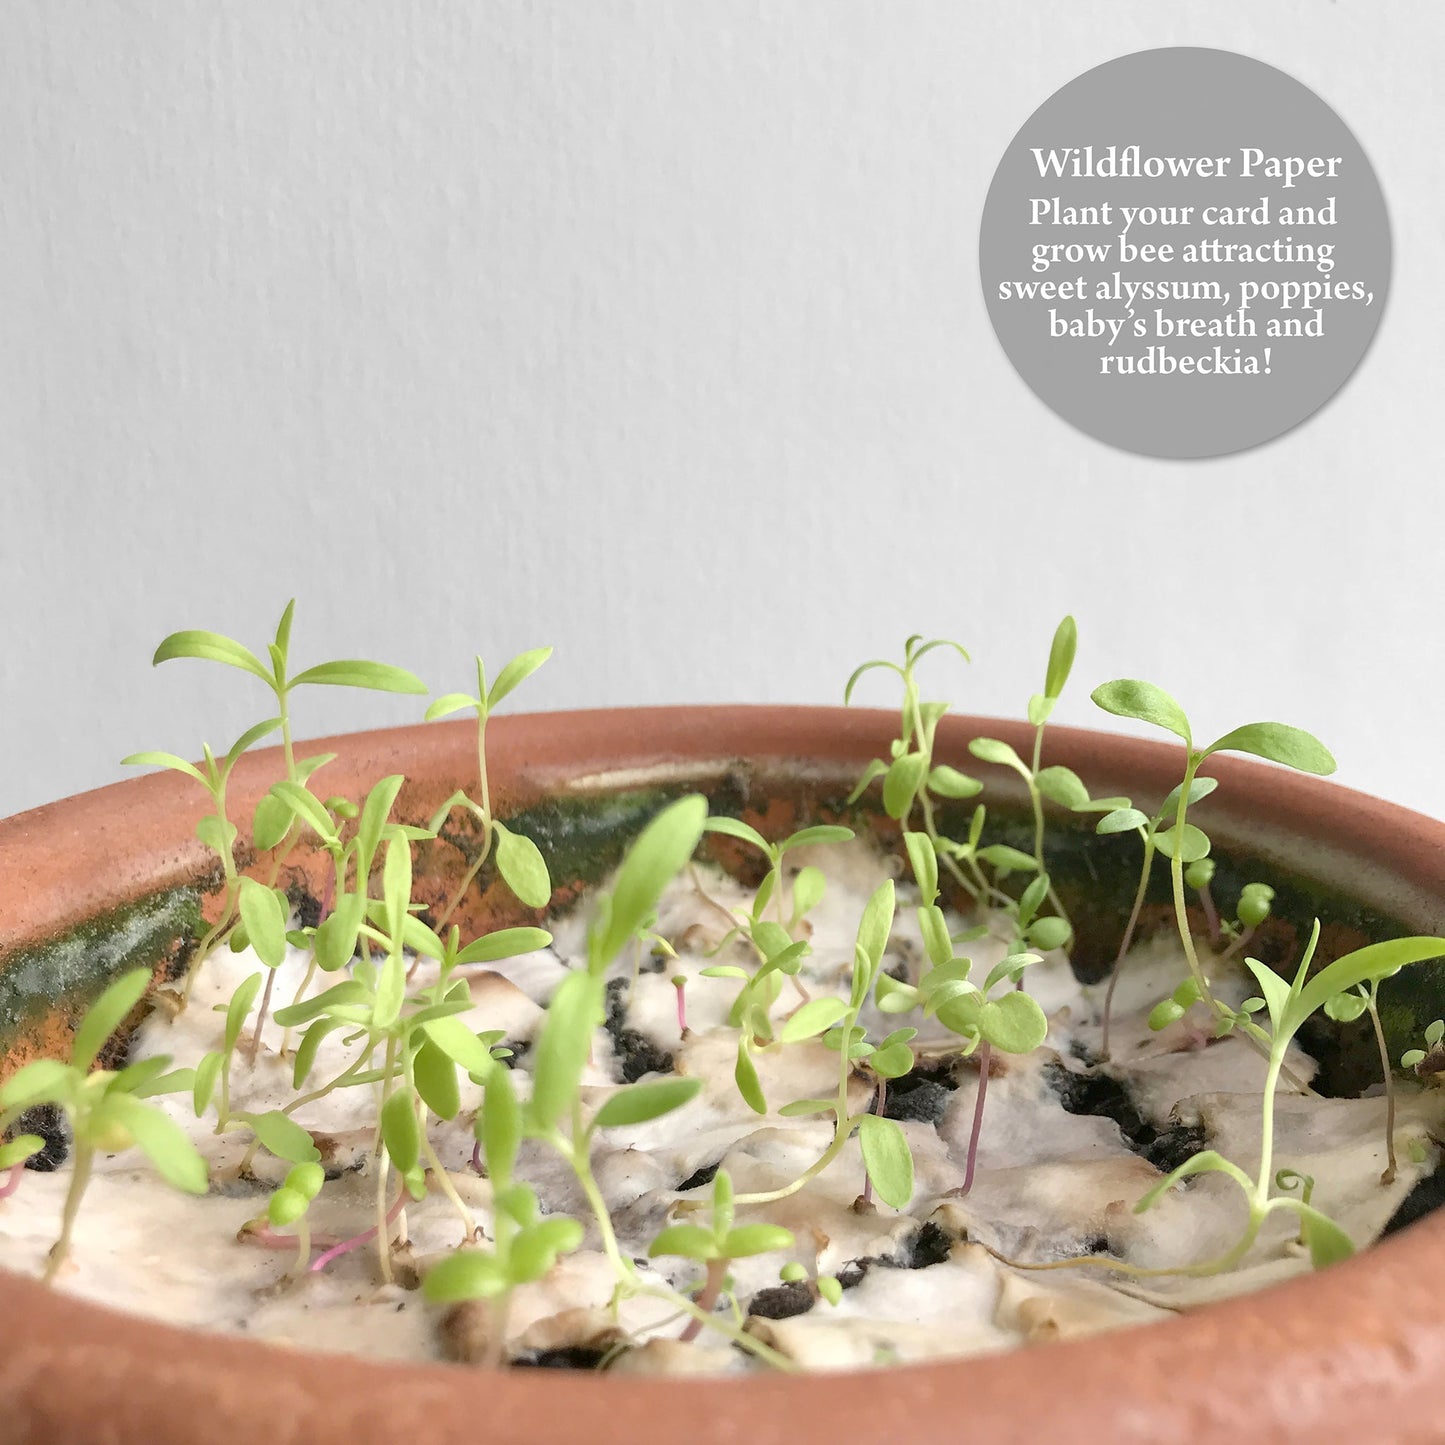 Image shows a wildflower seed card growing inside a pot. The paper contains a mix of sweet alyssum, poppy, baby's breath and rudbeckia seeds so when your recipient has finished with their card they can plant it and grow flowers.